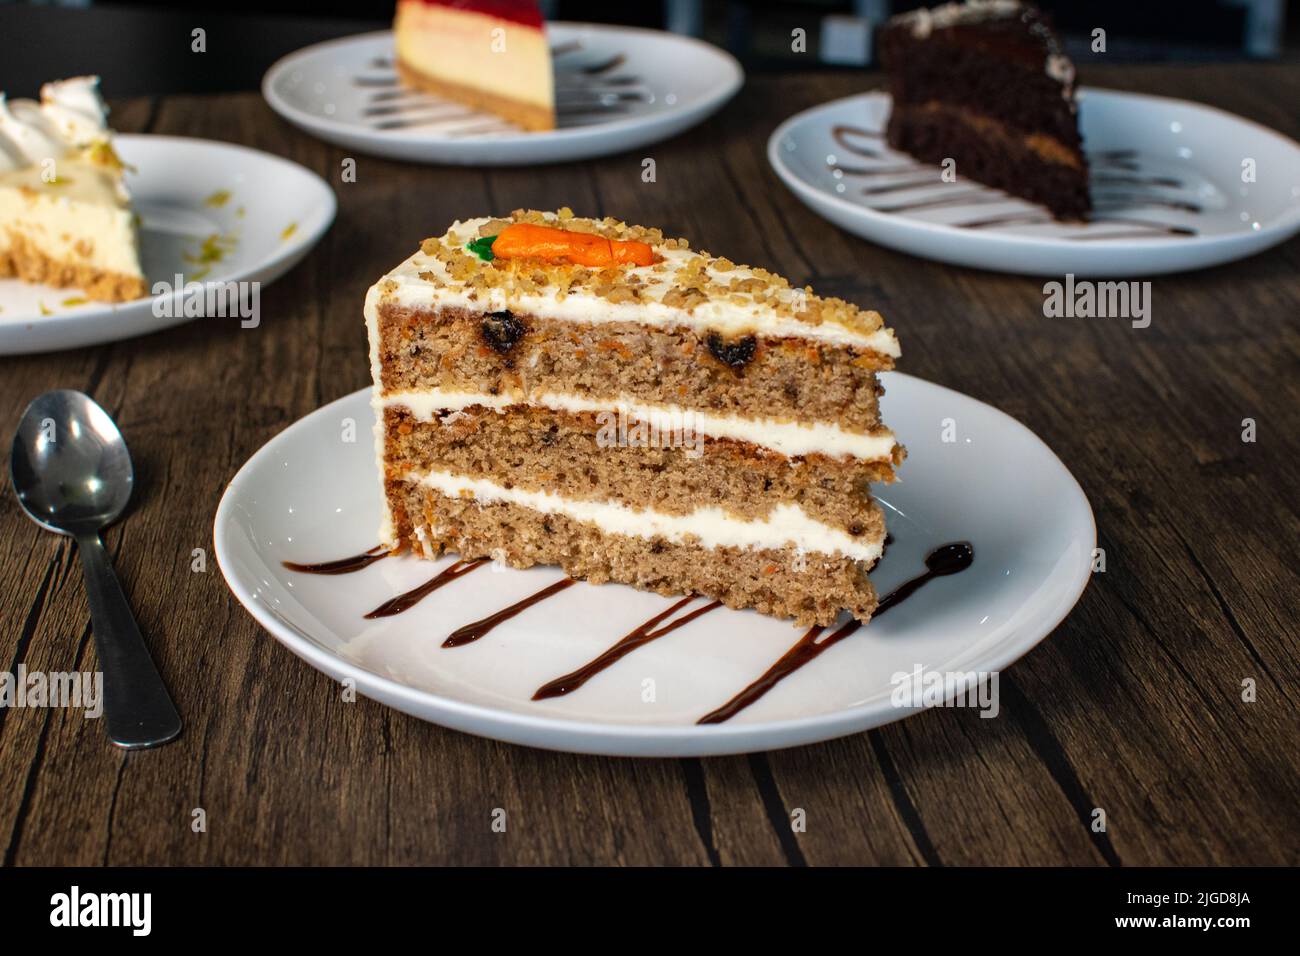 Delicious Carrot Cake with nice decoration horizontal view Stock Photo